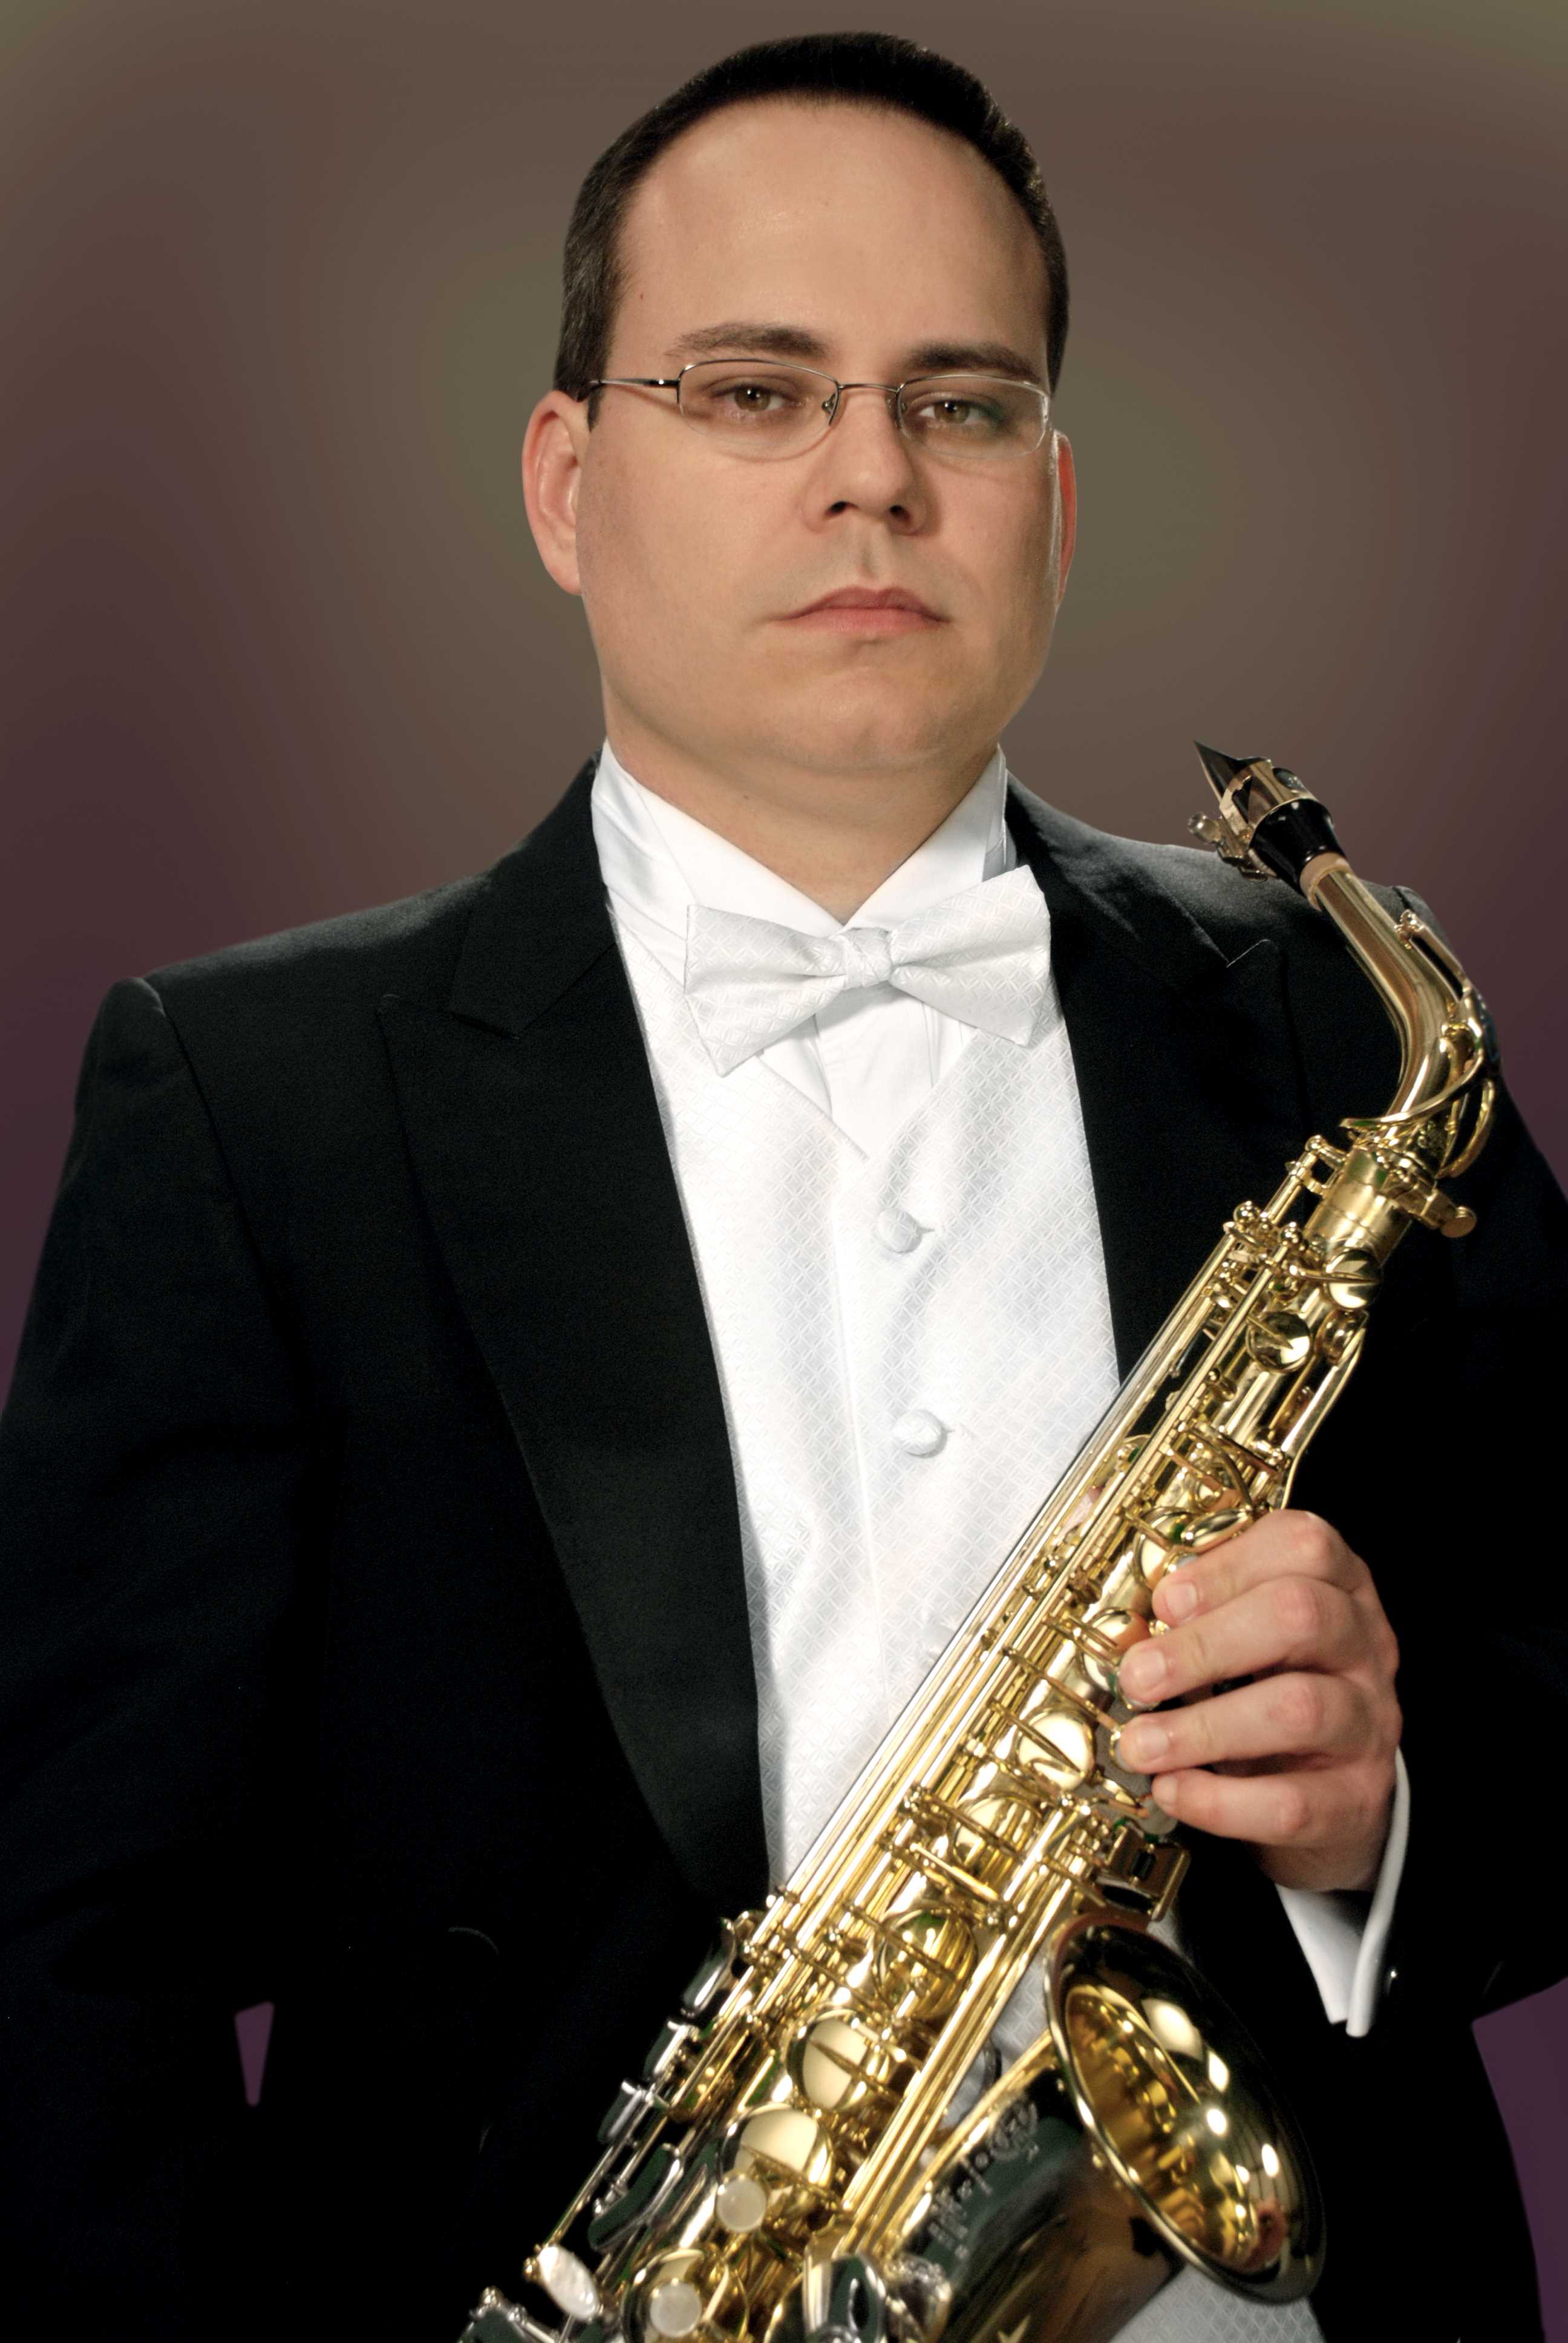 Caucasian male with close cropped black hair wearing a tuxedo with white bow tie. He wears glasses and holds a saxophone. 